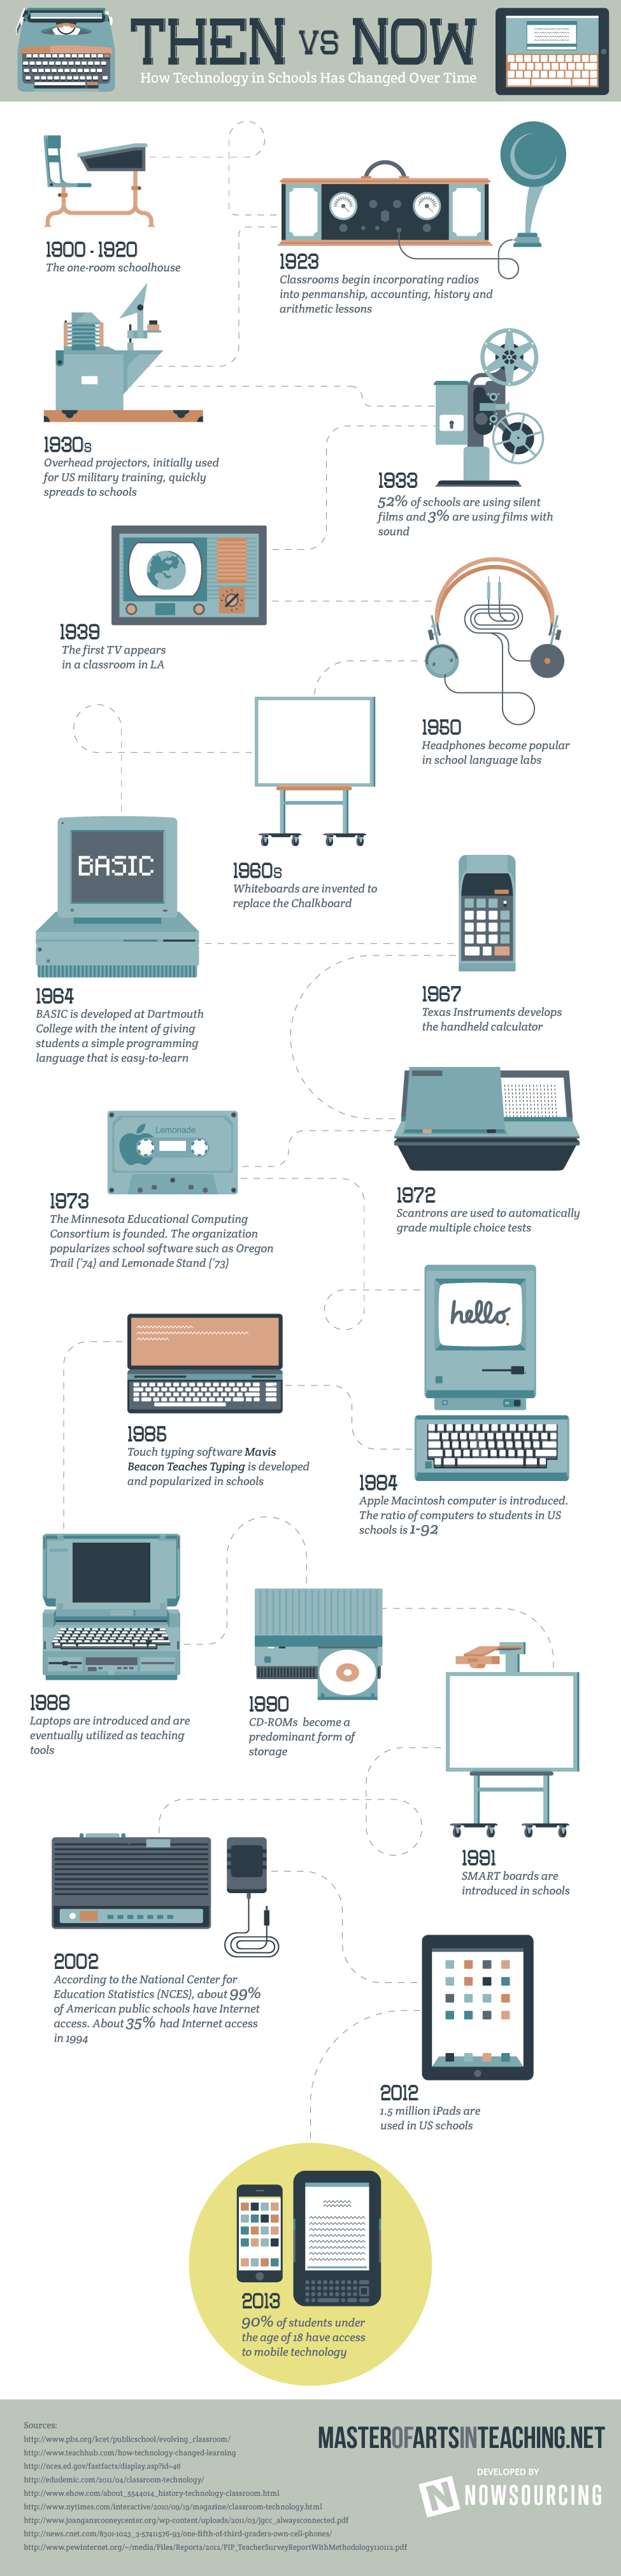 How-Technology-in-Schools-Has-Changed-Over-Time-Infographic